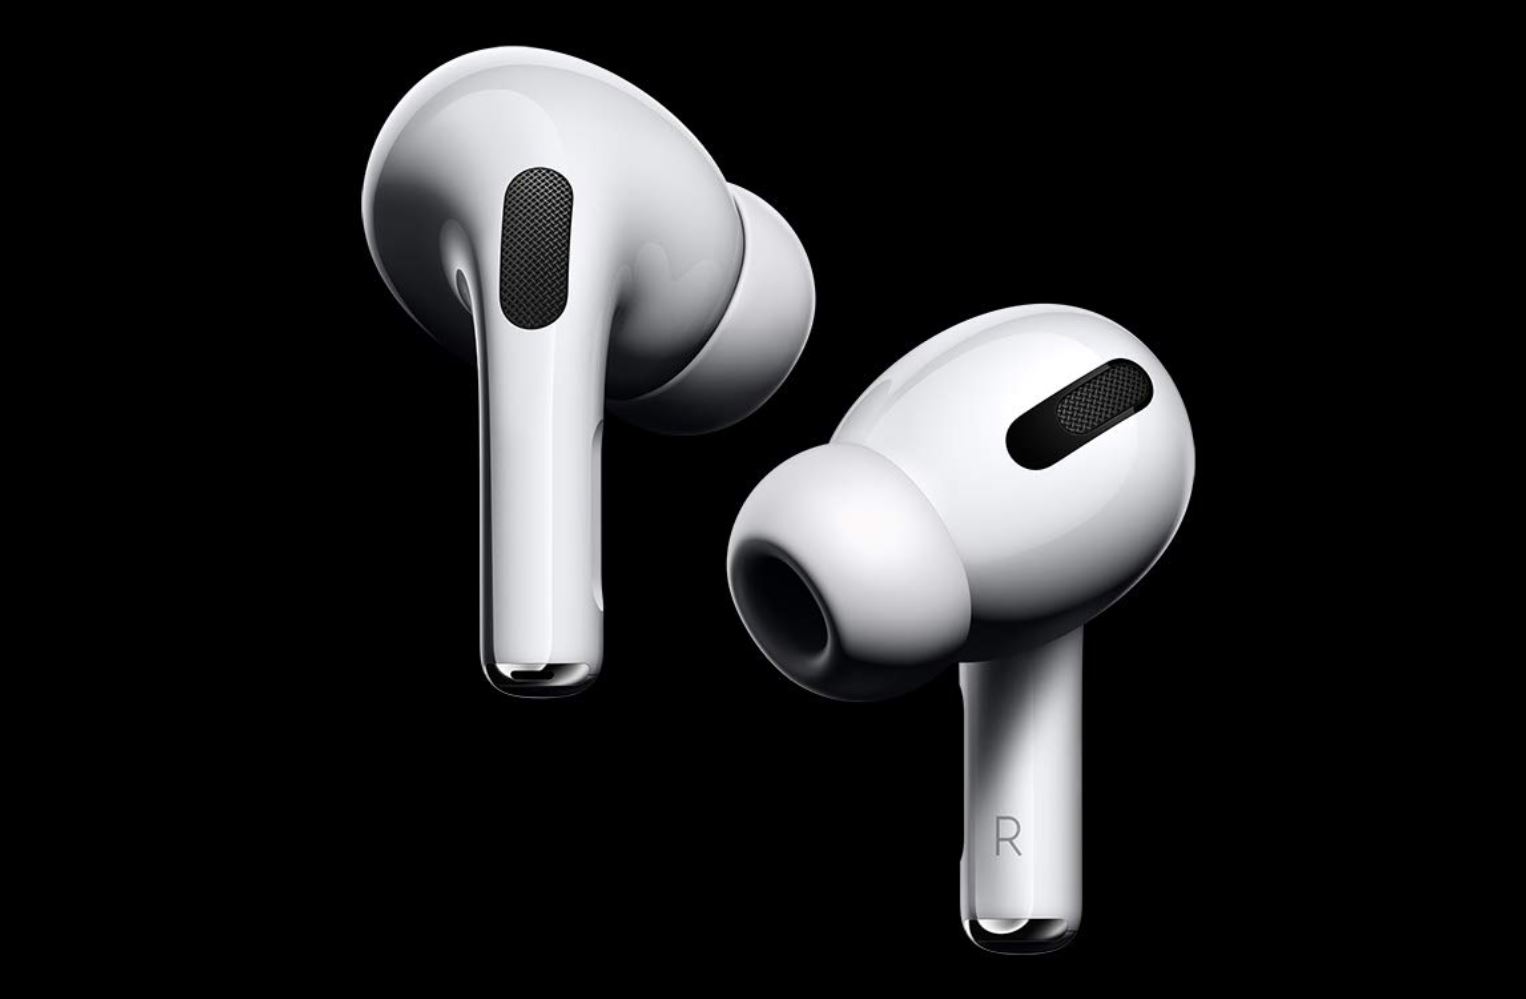 Get married dinosaur burden Apple fixes AirPods Pro 2 issue with Google Pixel smartphones and adds new  Beats Studio Buds feature as part of wider audio product updates -  NotebookCheck.net News